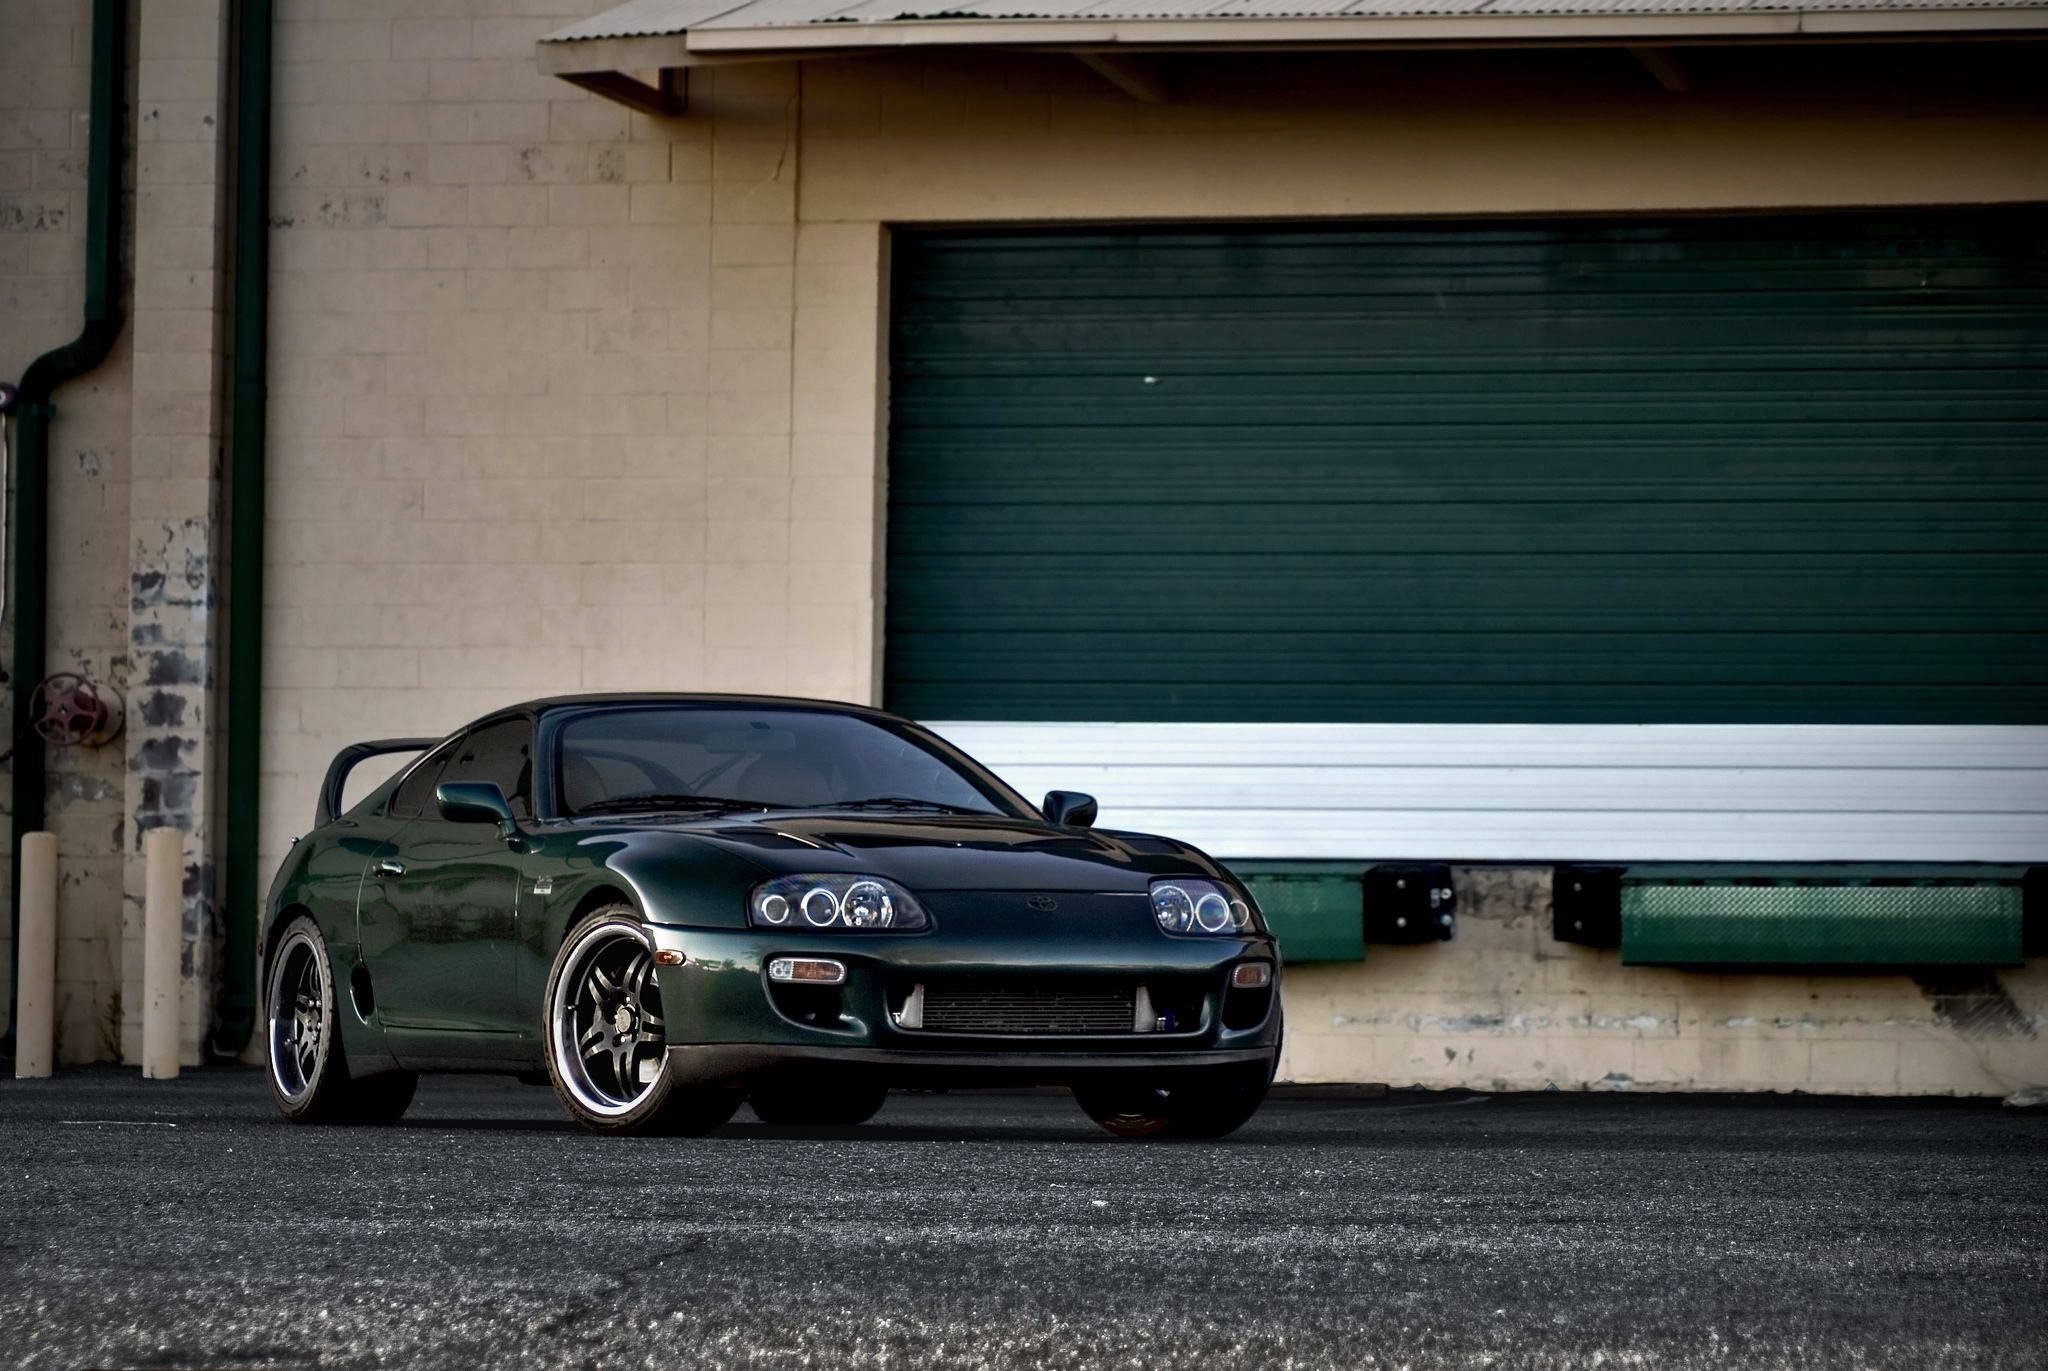 Download wallpaper 2048x1371 toyota, supra, green, front view hd background